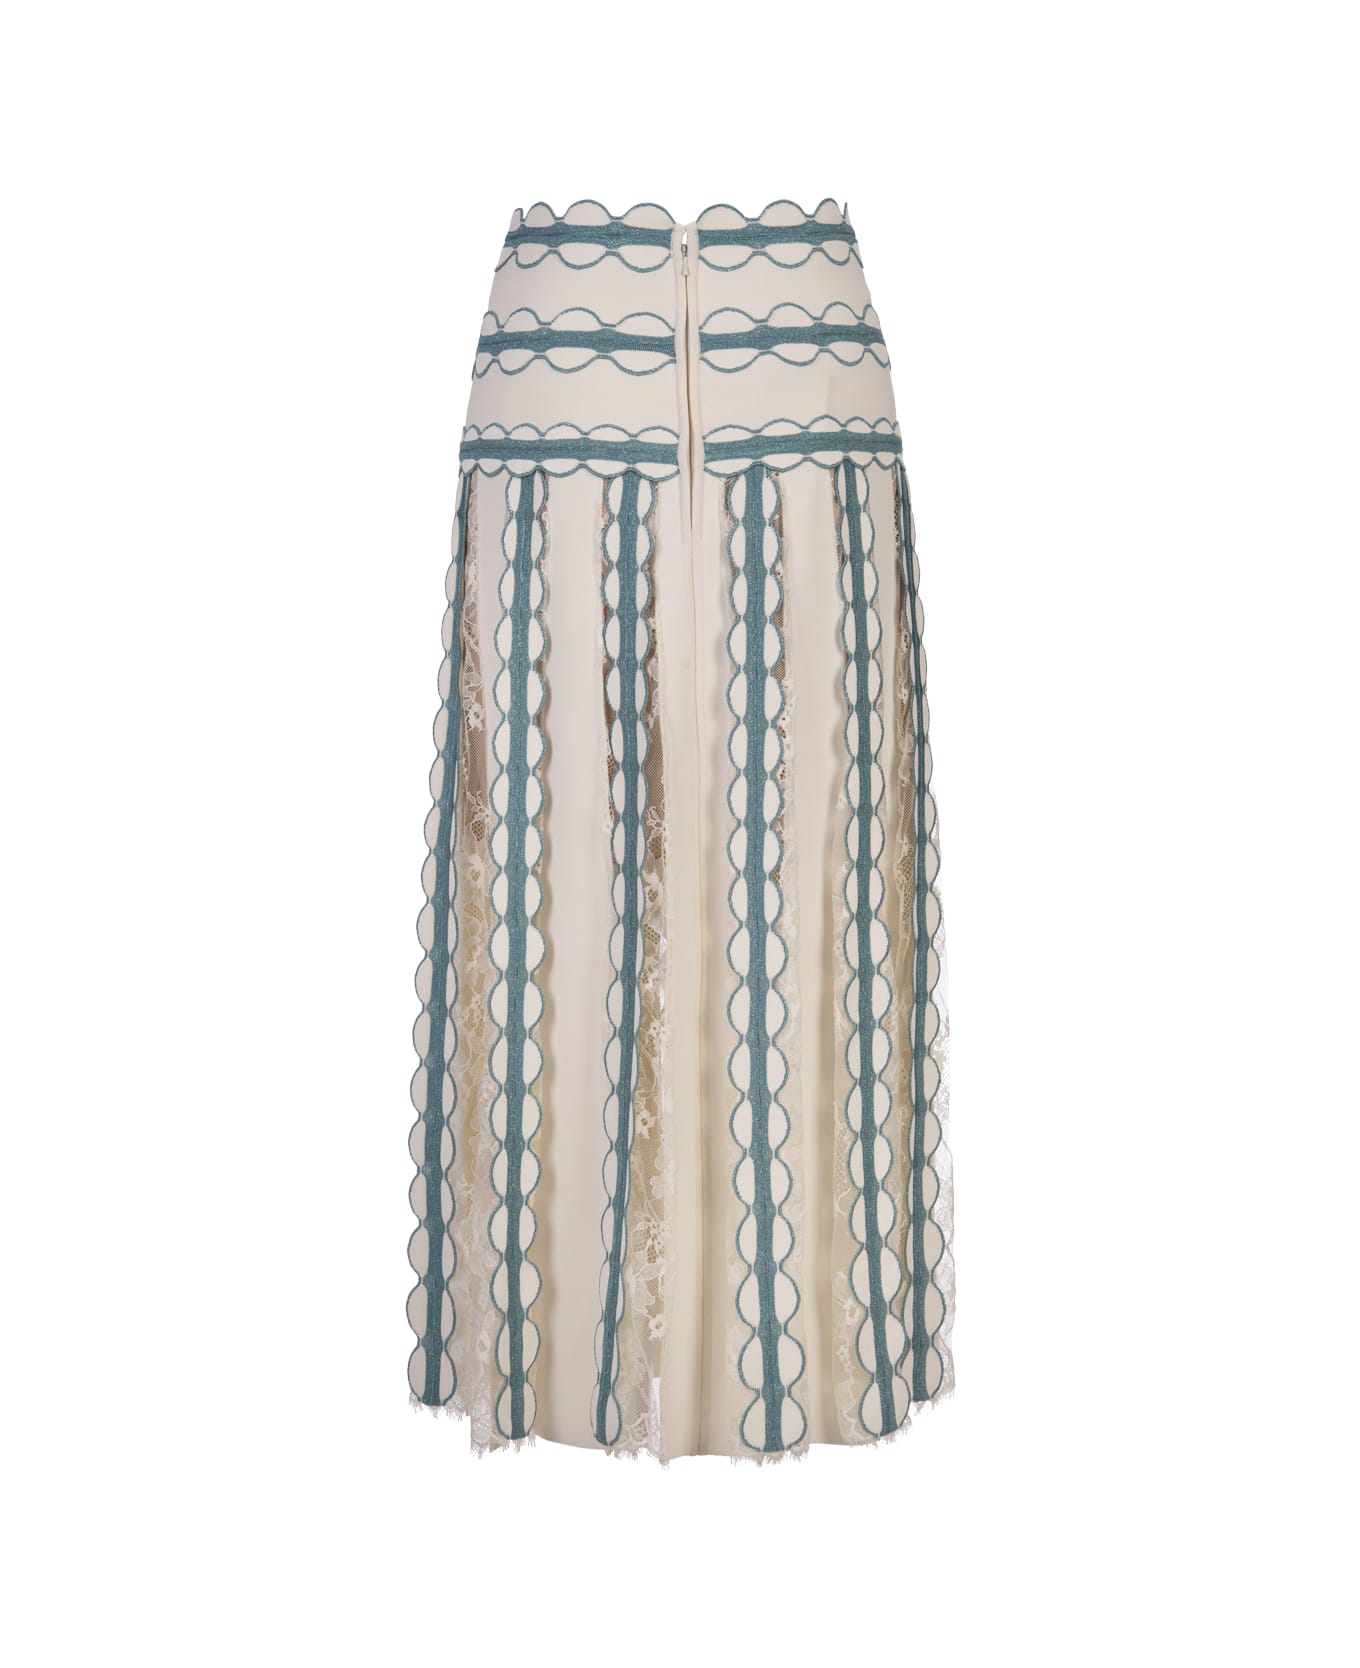 Elie Saab Knit And Lace Midi Skirt In White And Blue Gin - White